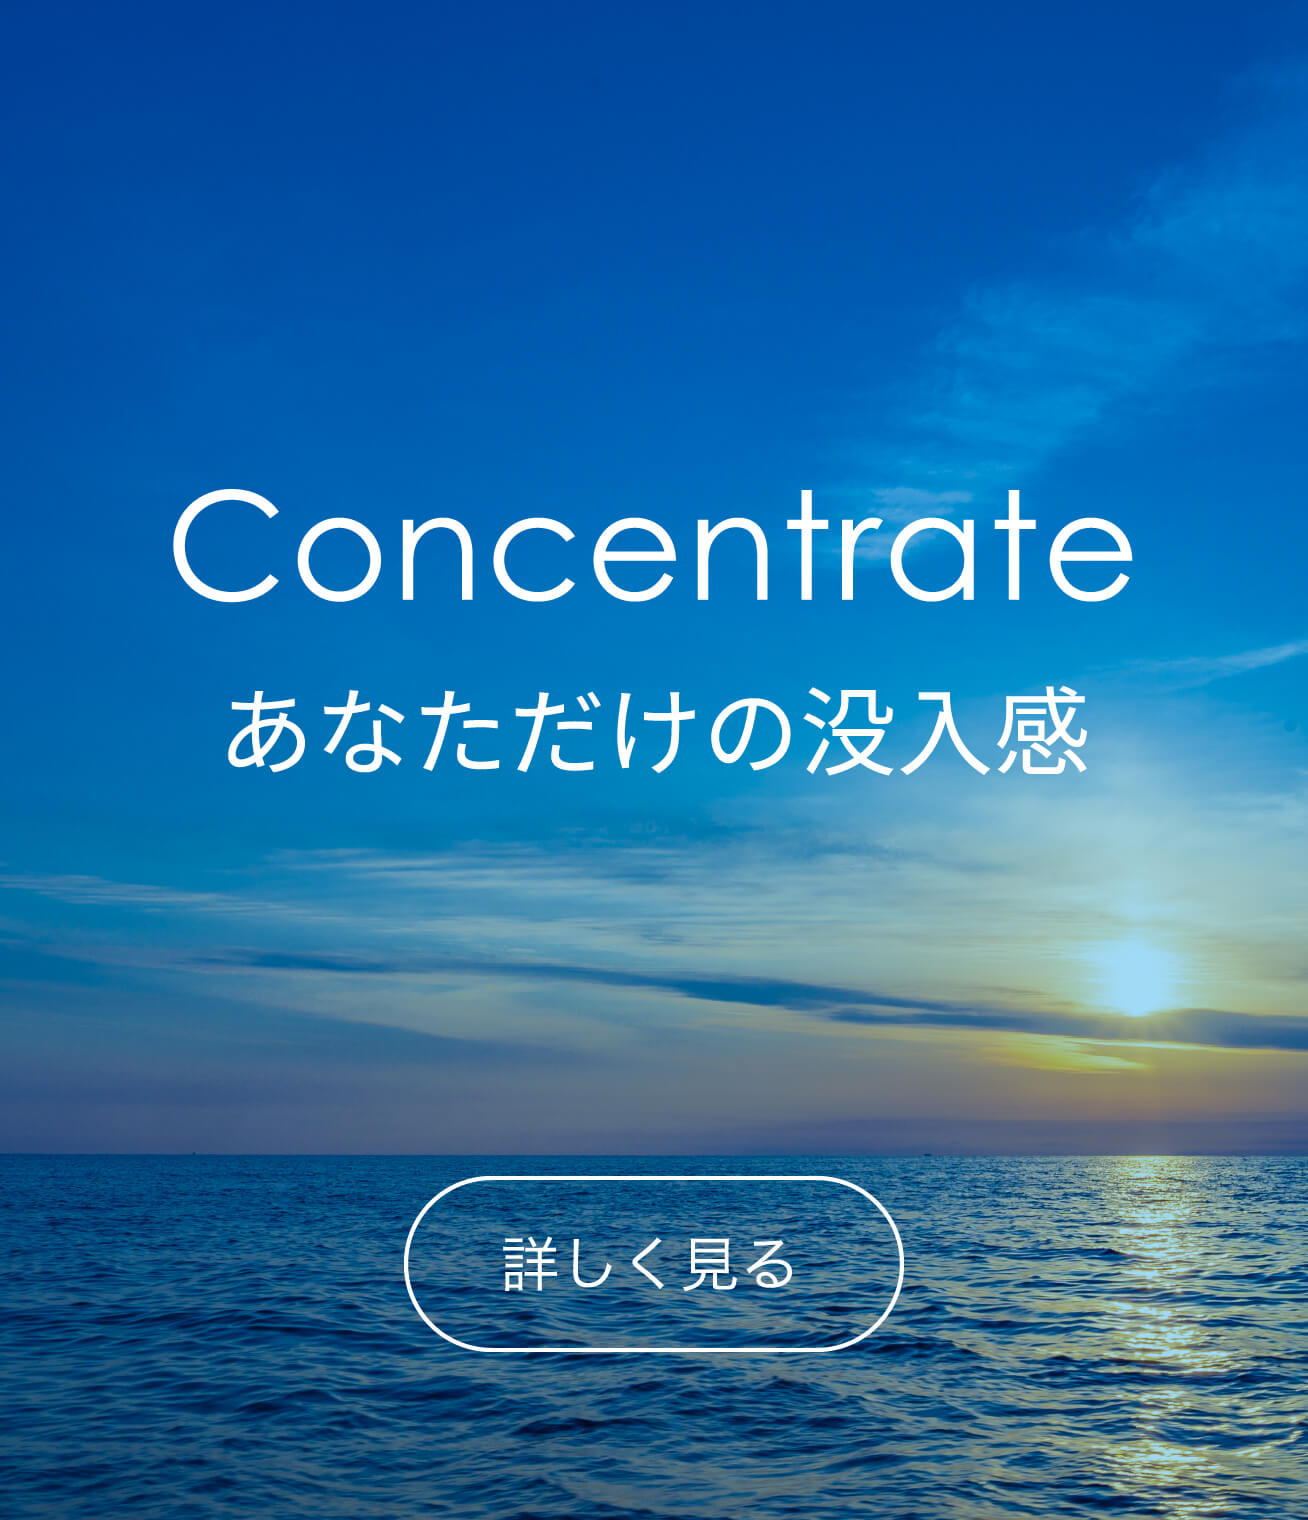 Concentrate あなただけの没入感